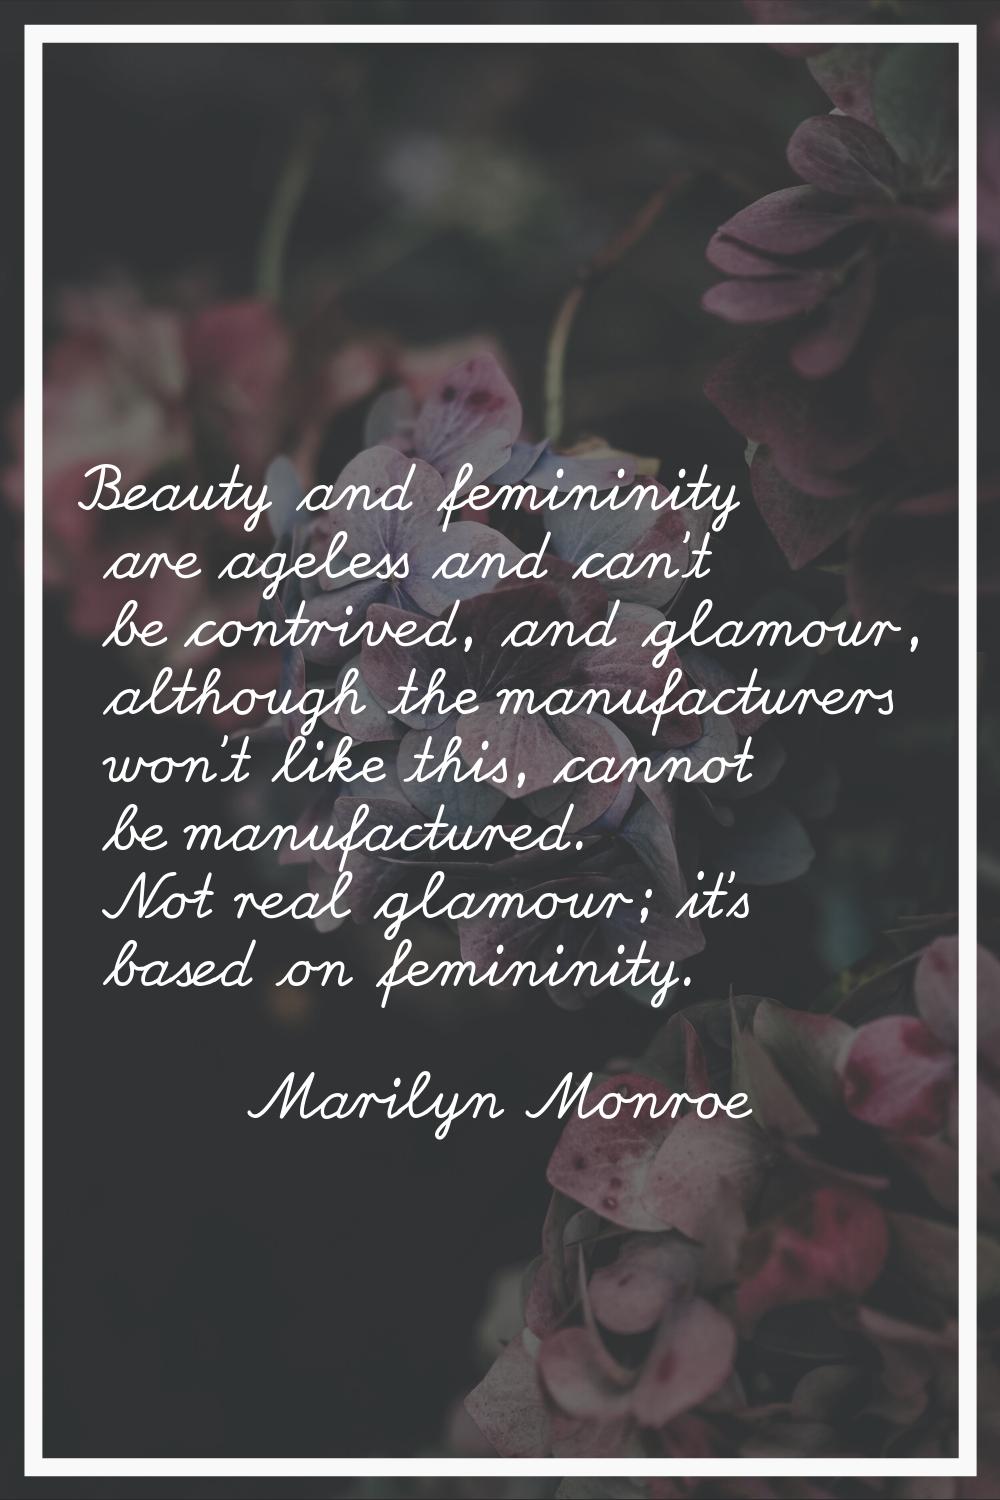 Beauty and femininity are ageless and can't be contrived, and glamour, although the manufacturers w